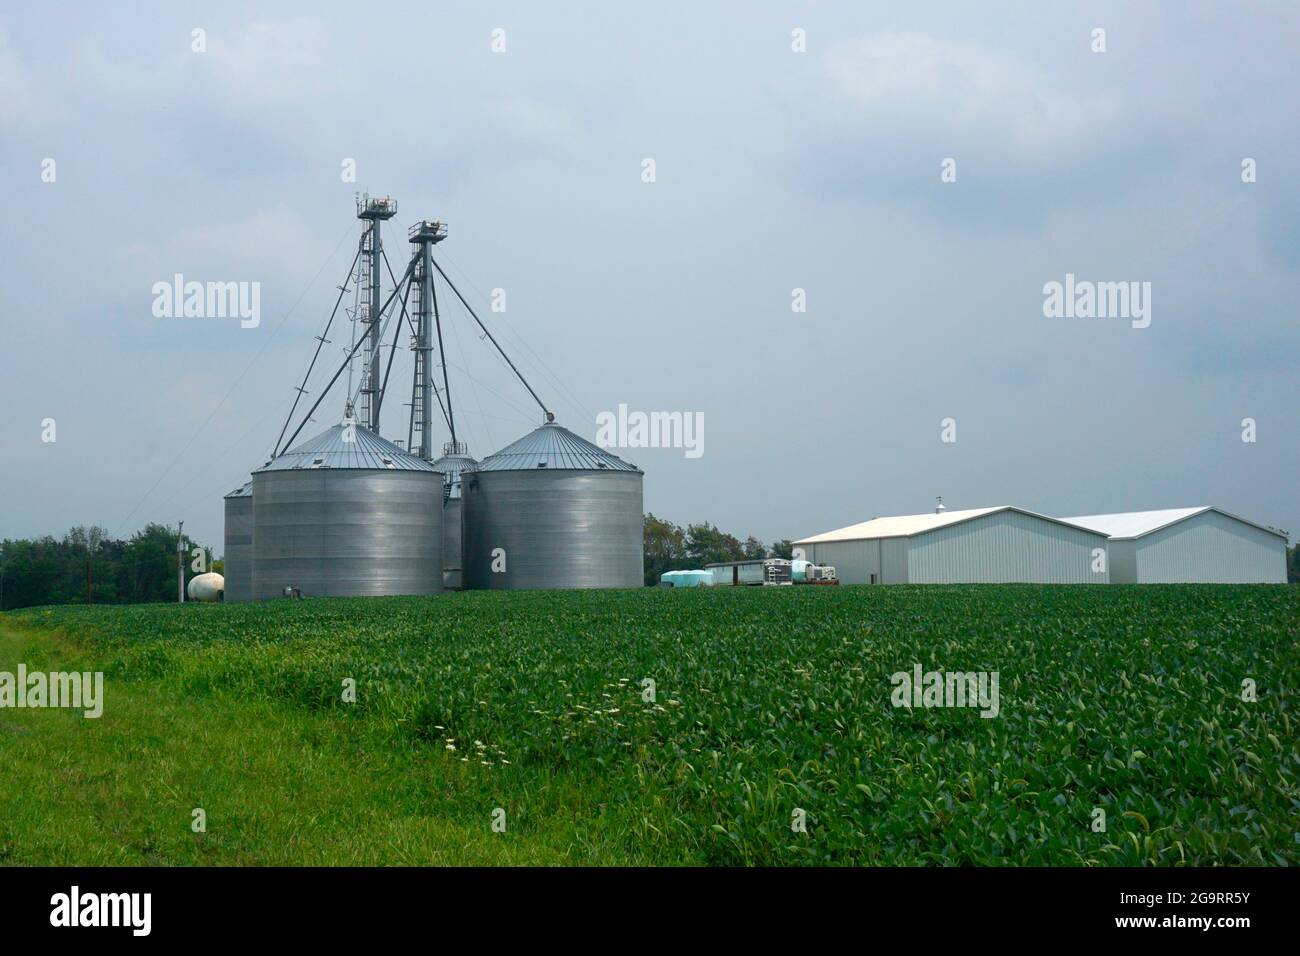 Agricultural buildings next to a filed of soybeans under a cloudy sky Stock Photo